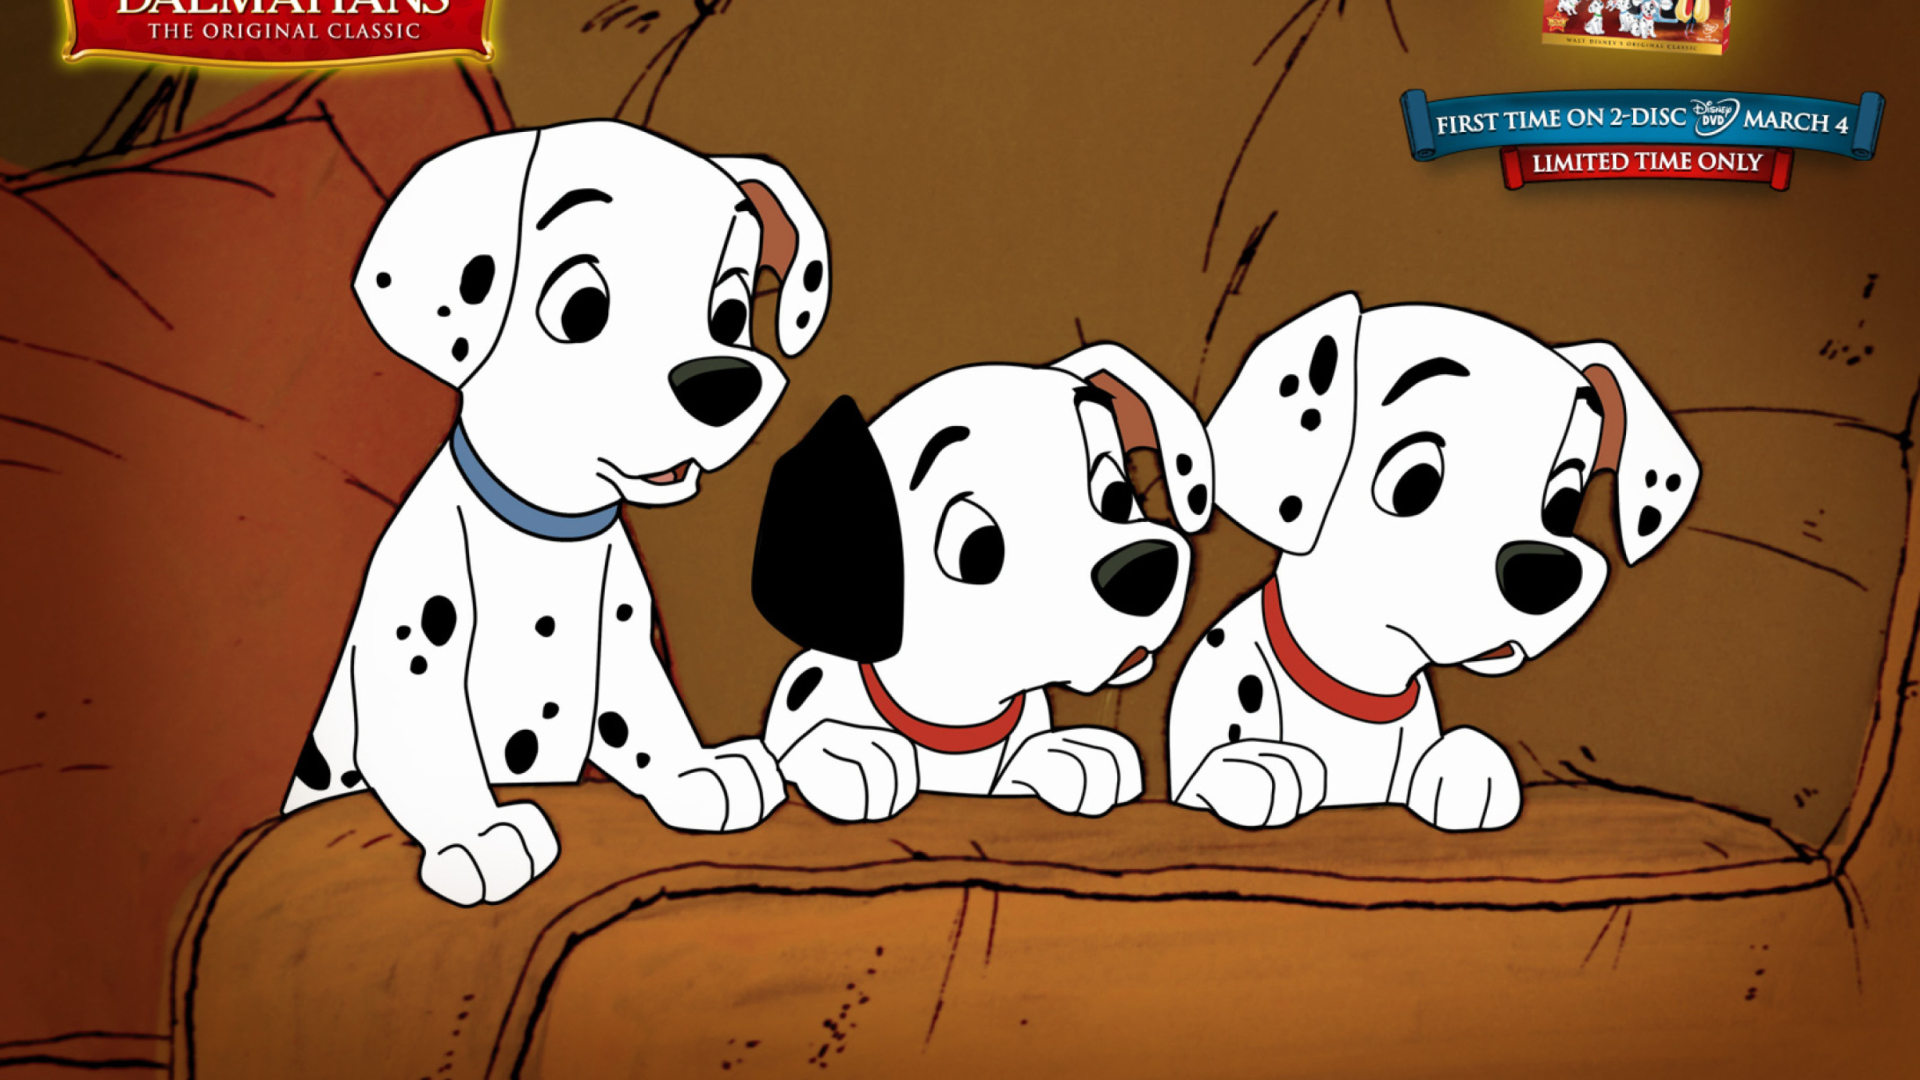 One Hundred and One Dalmatians screenshot #1 1920x1080